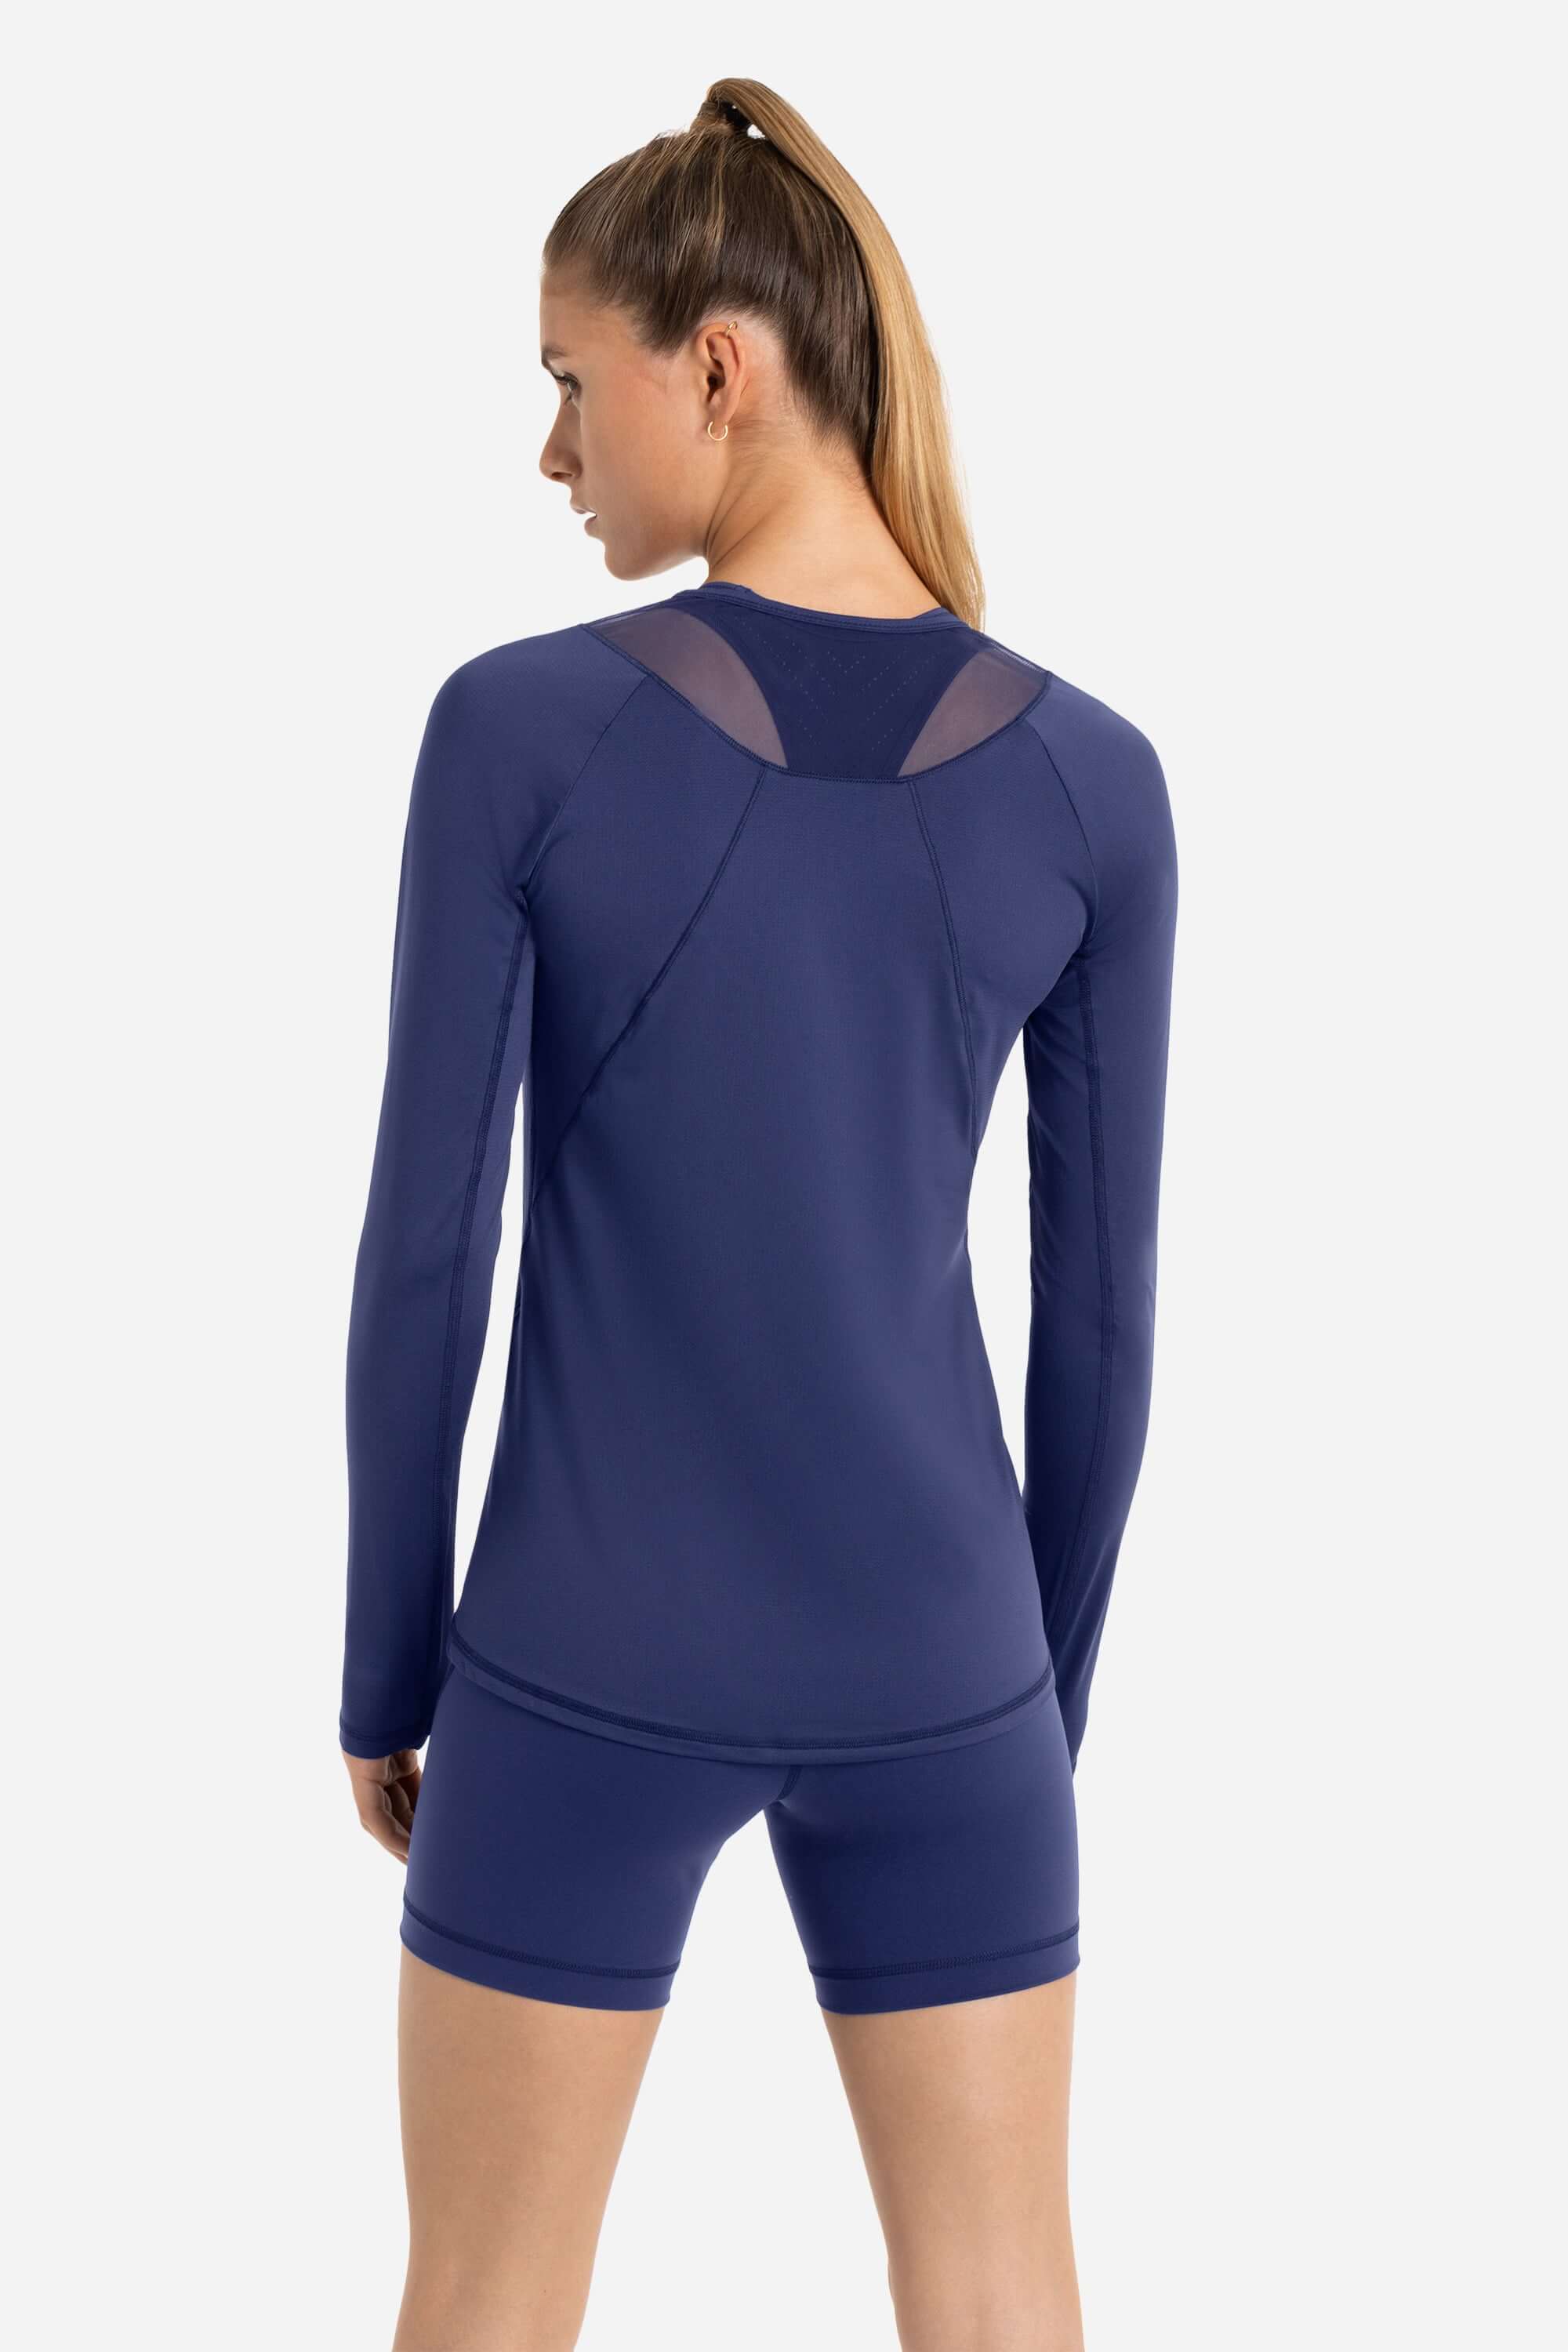 Women in a blue long sleeve workout t-shirt with blue short tights